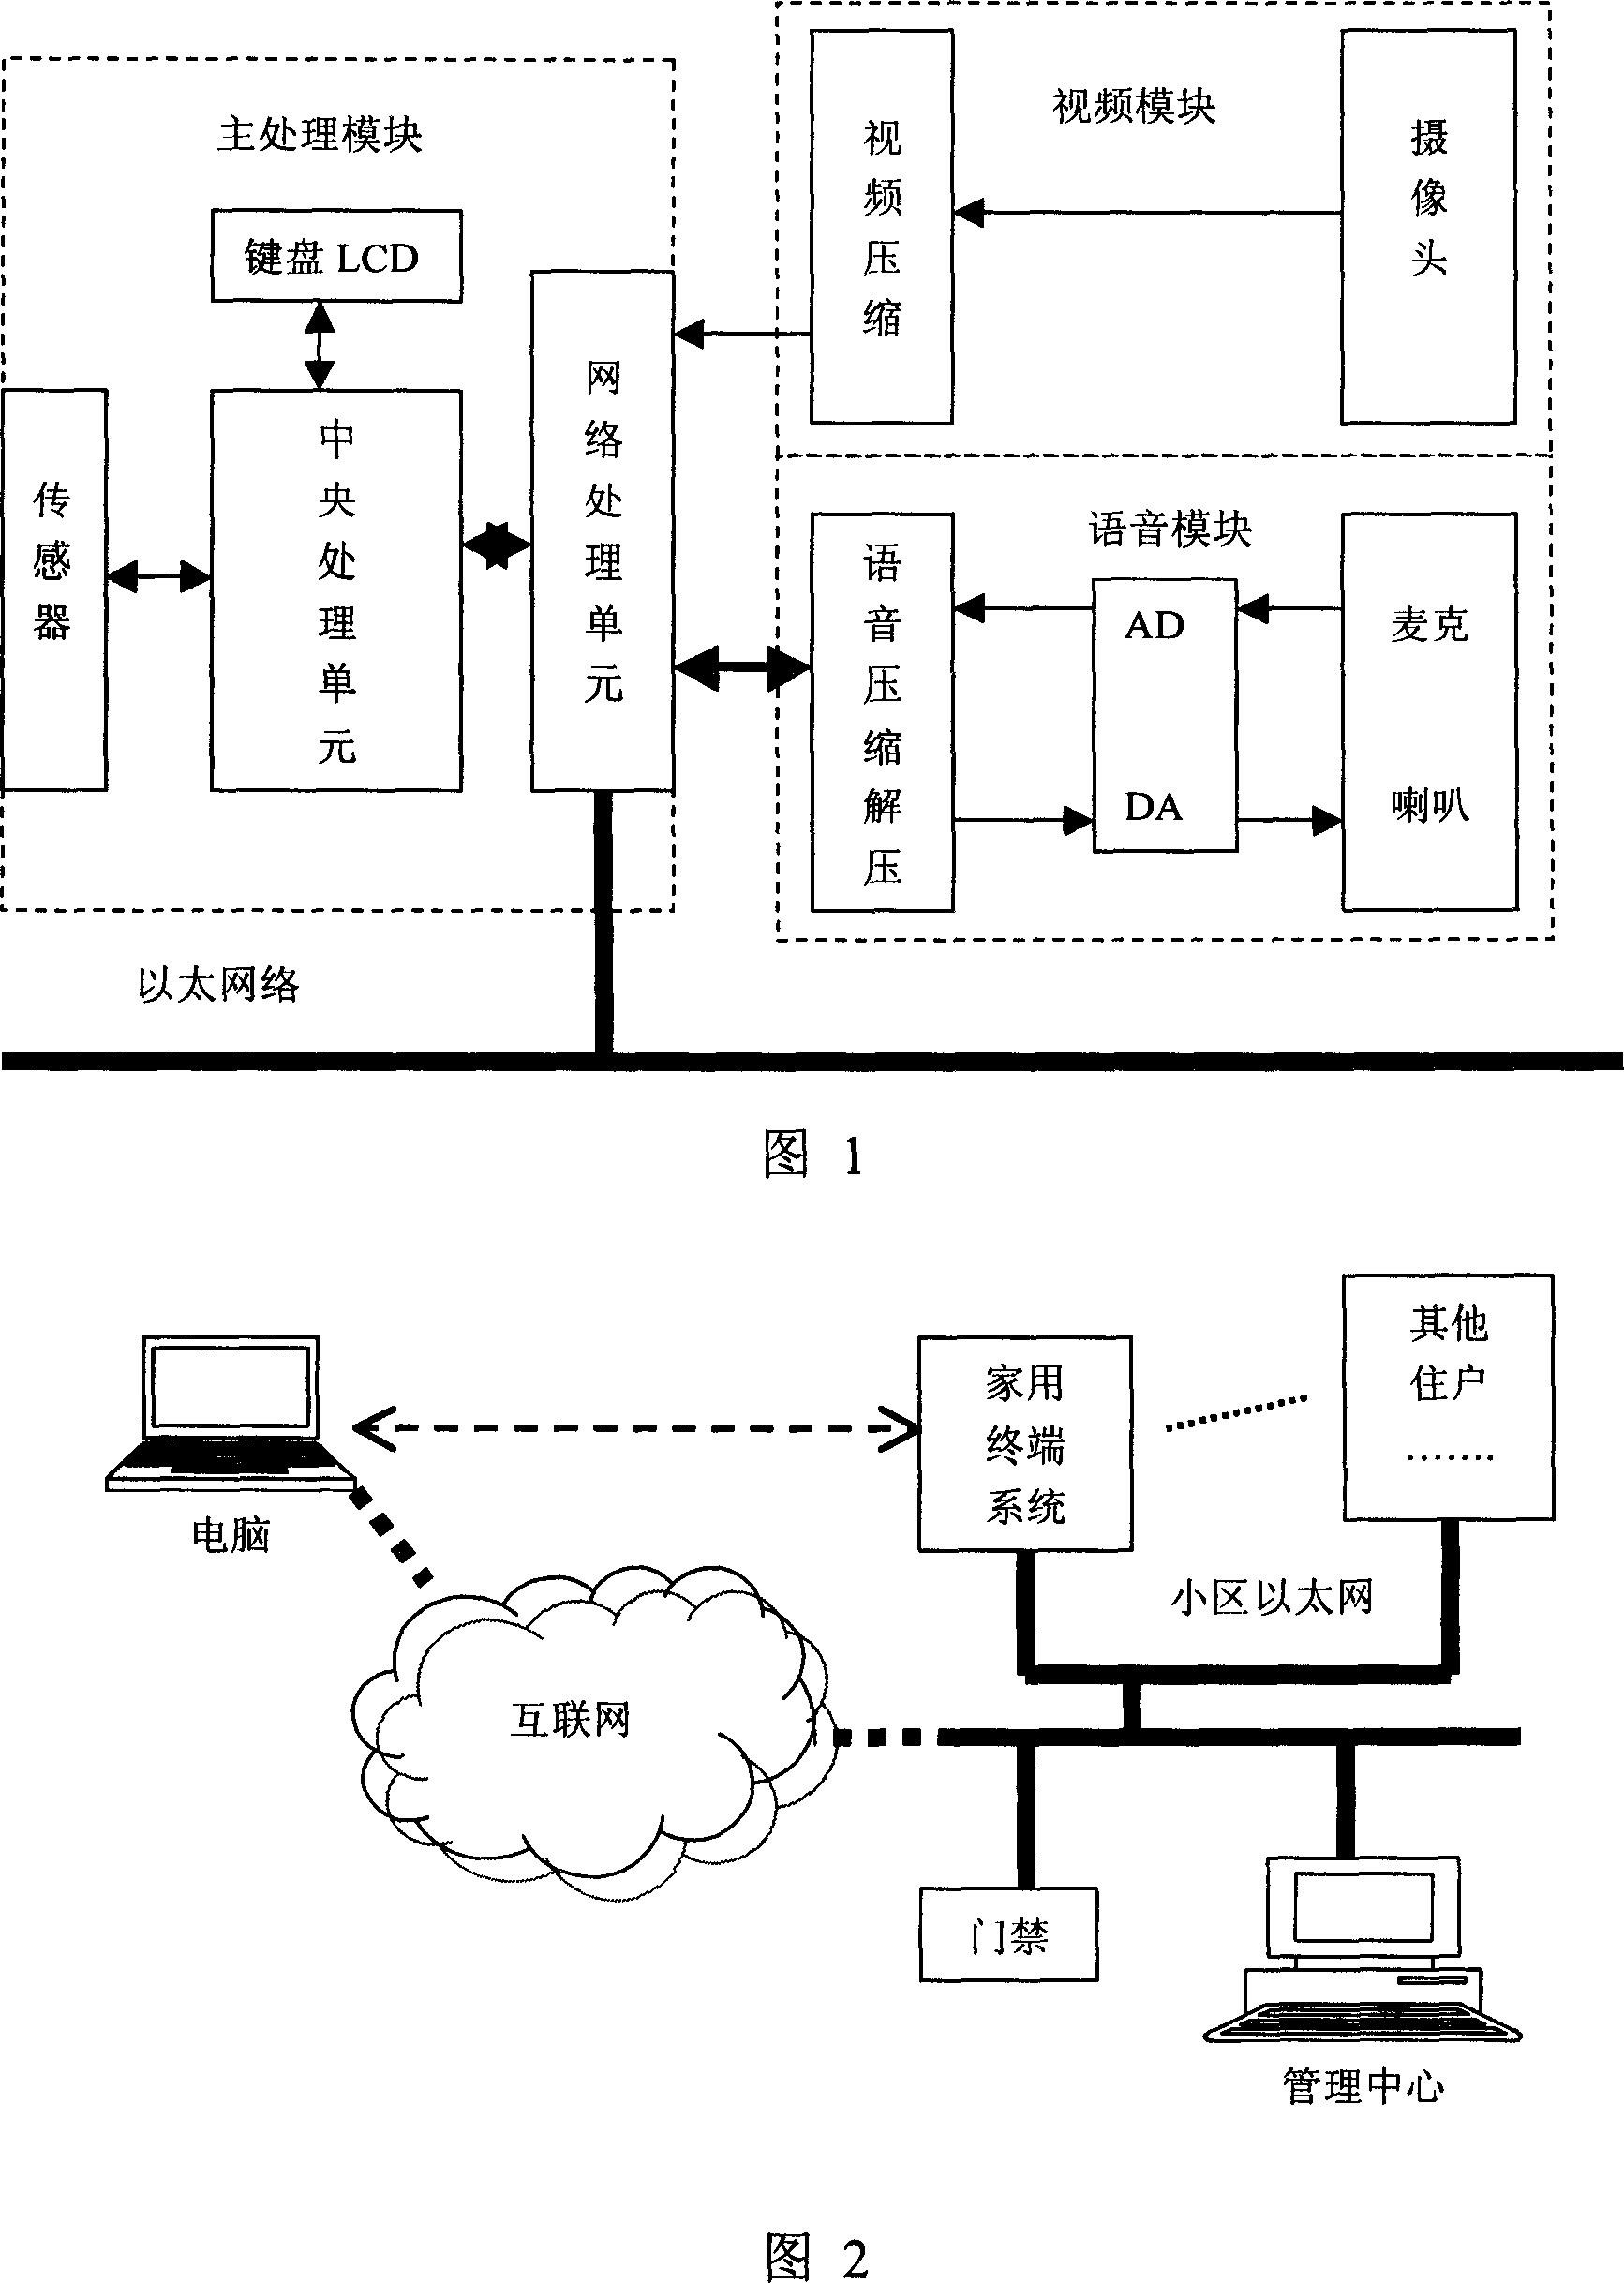 Home information service terminal based on Ethernet and its system